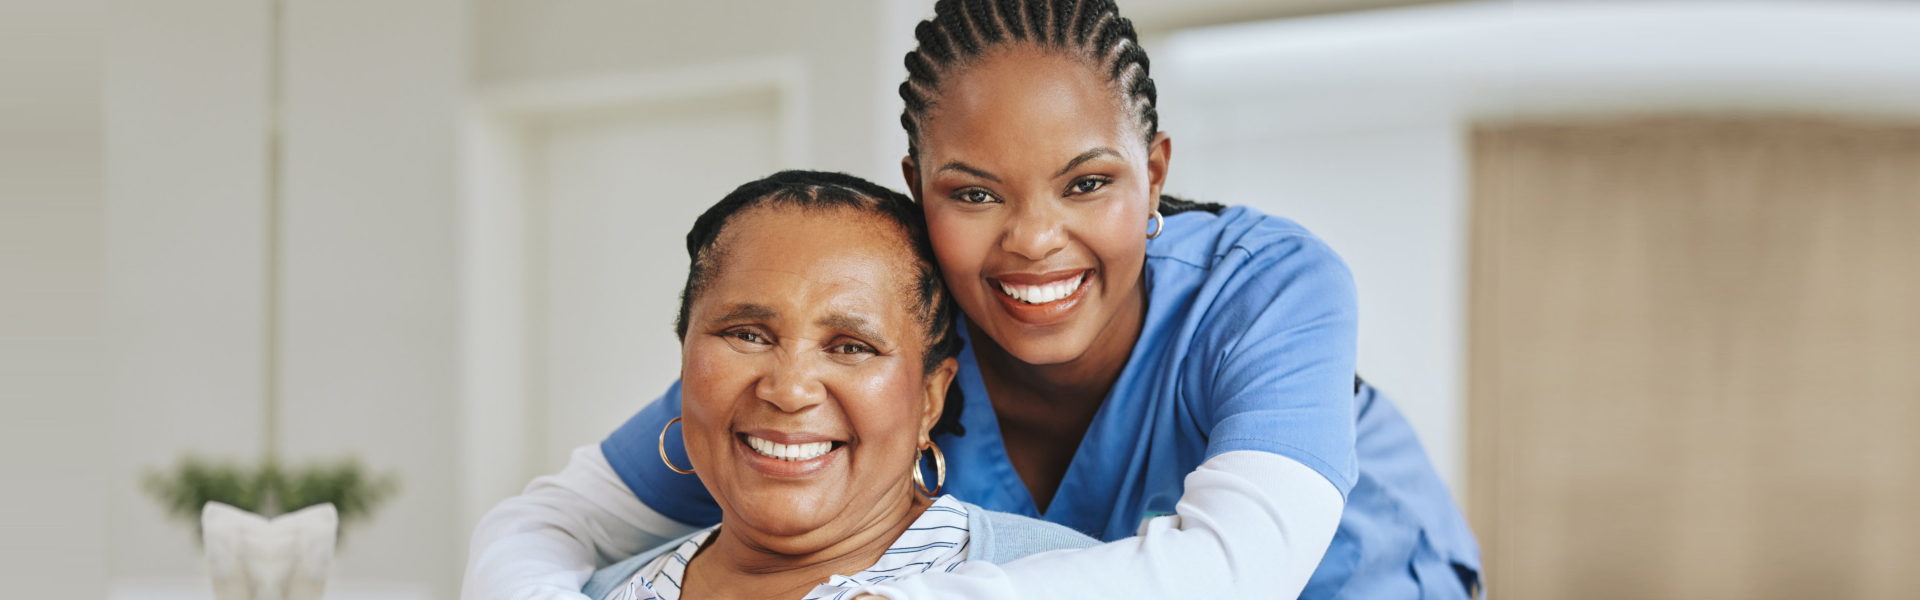 senior woman and caregiver smiling happily